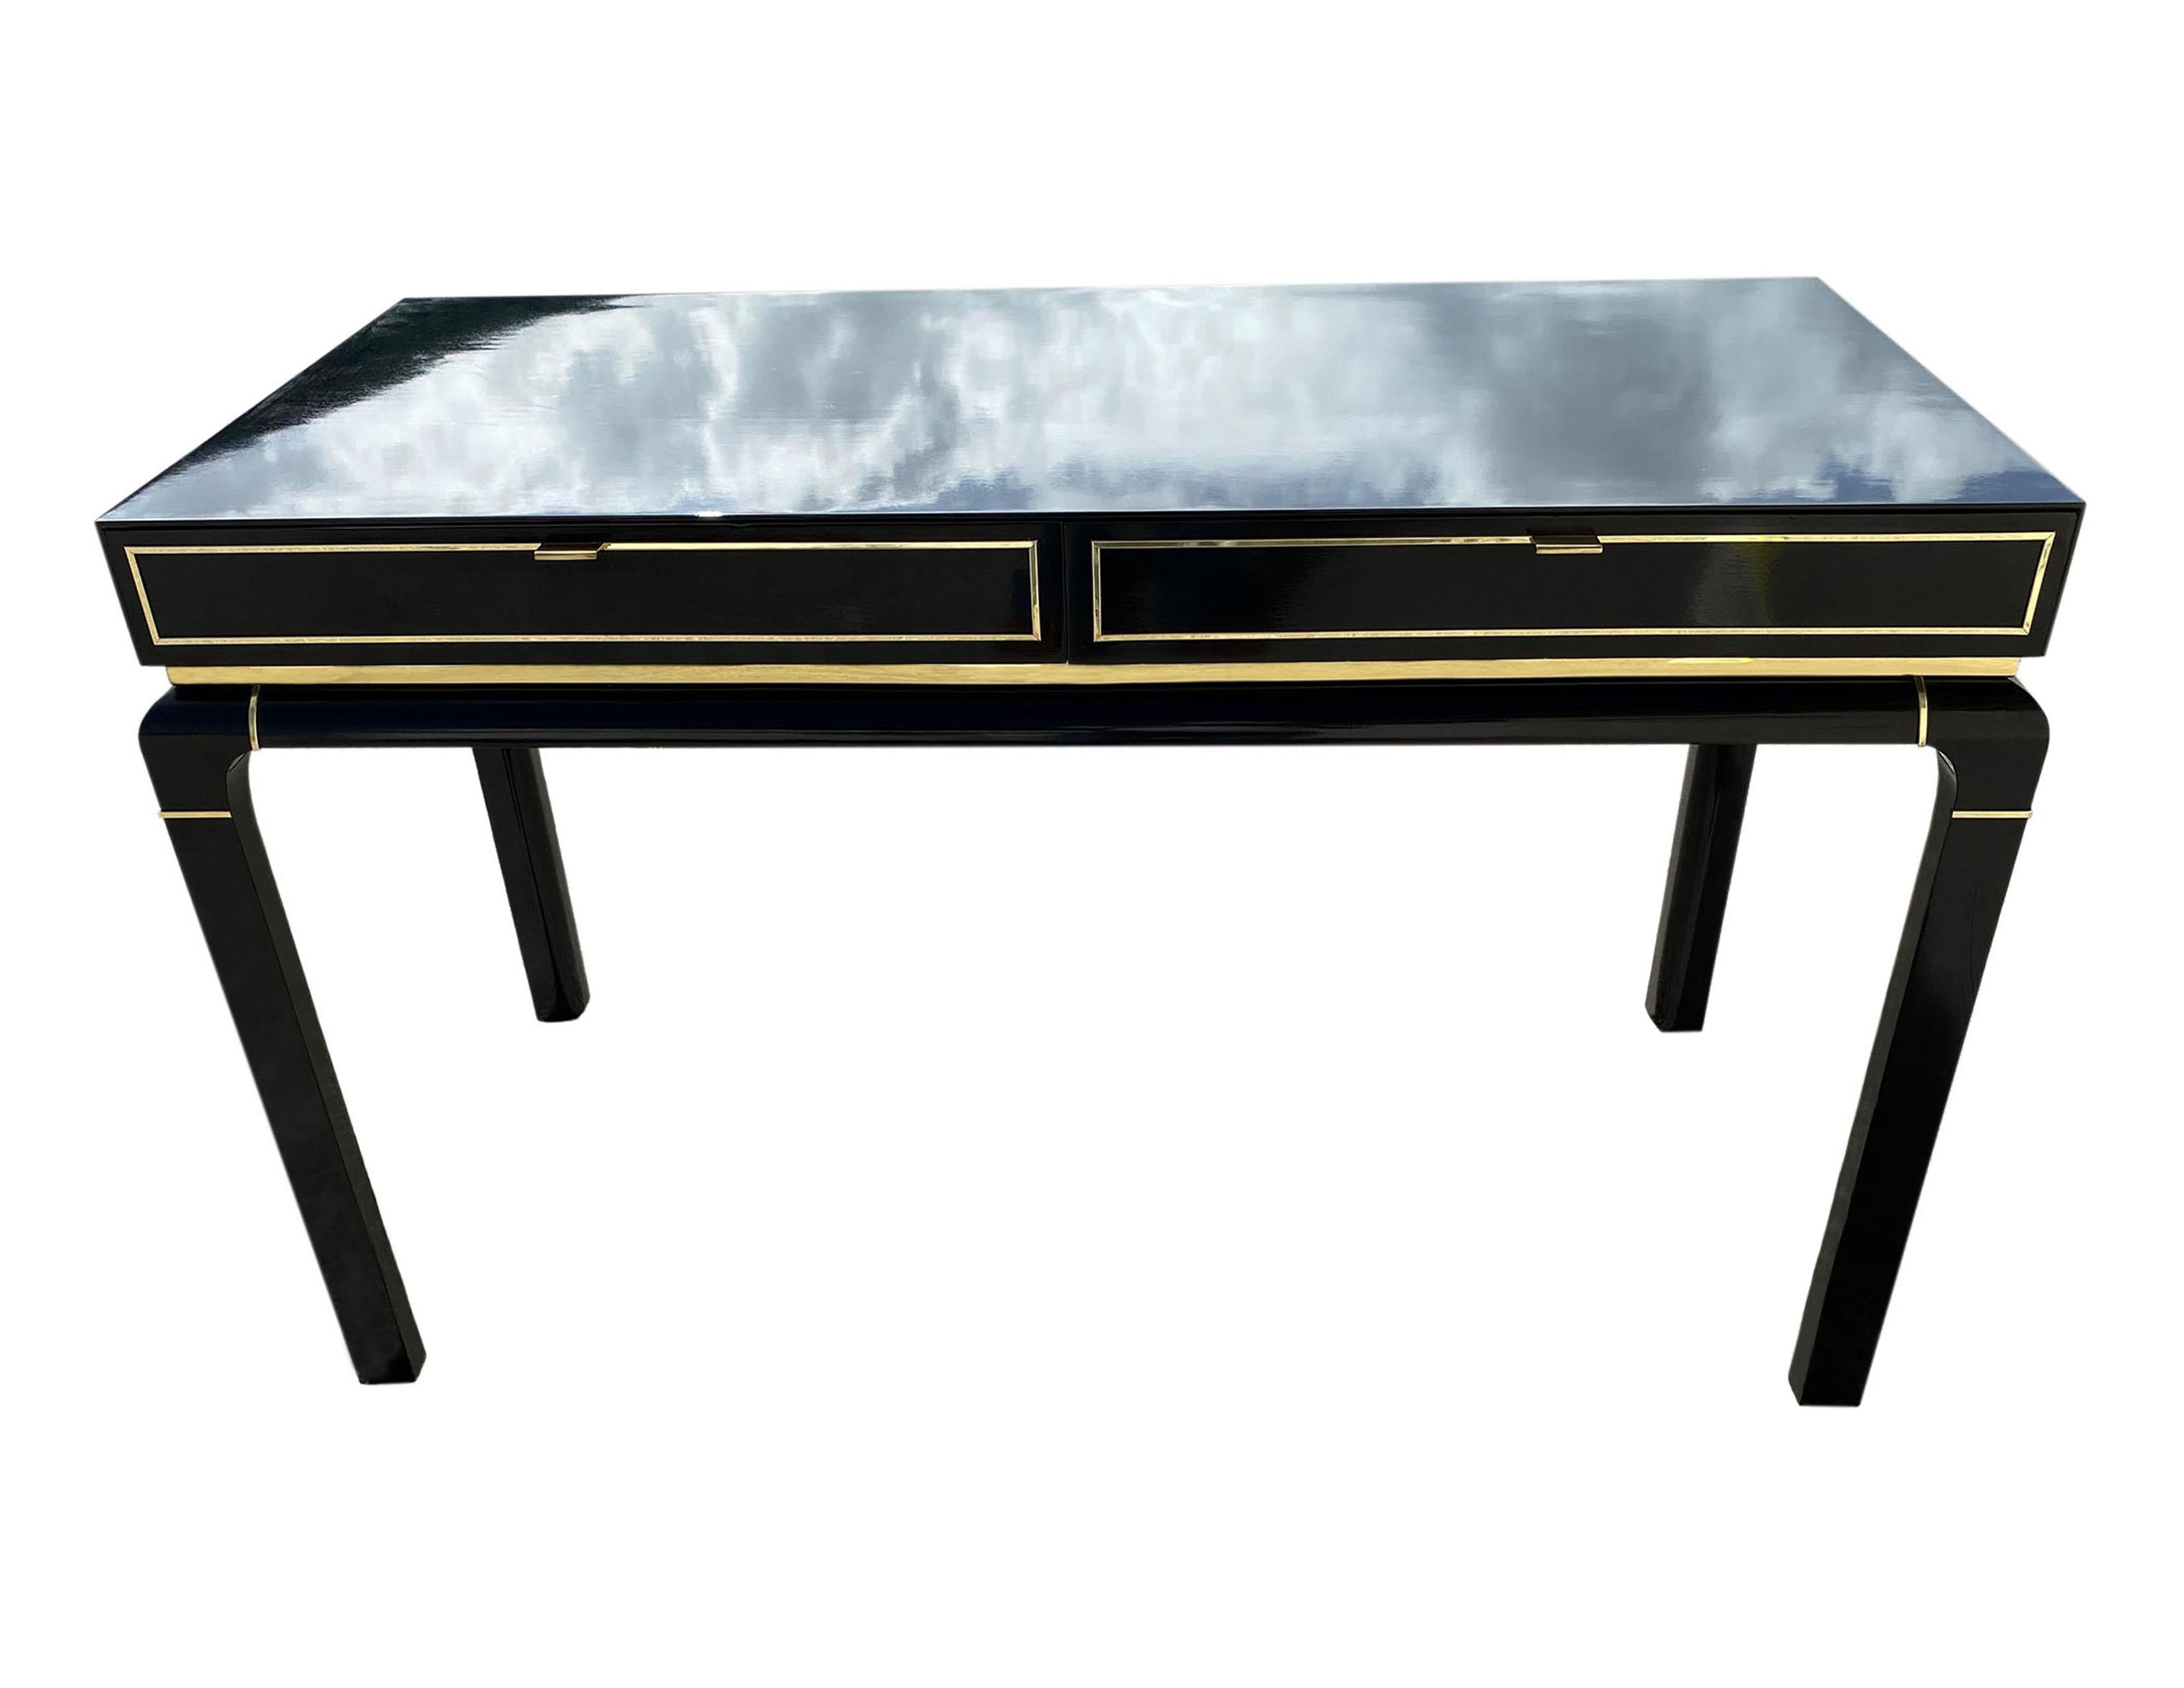 A timeless vintage piece, this midcentury writing desk feels glamourous, manufactured for John Stuart Inc. Adorning its exterior of glossy black lacquer, paired with bright brass accents feels crisp and luxe. Two spacious drawers for storage. This